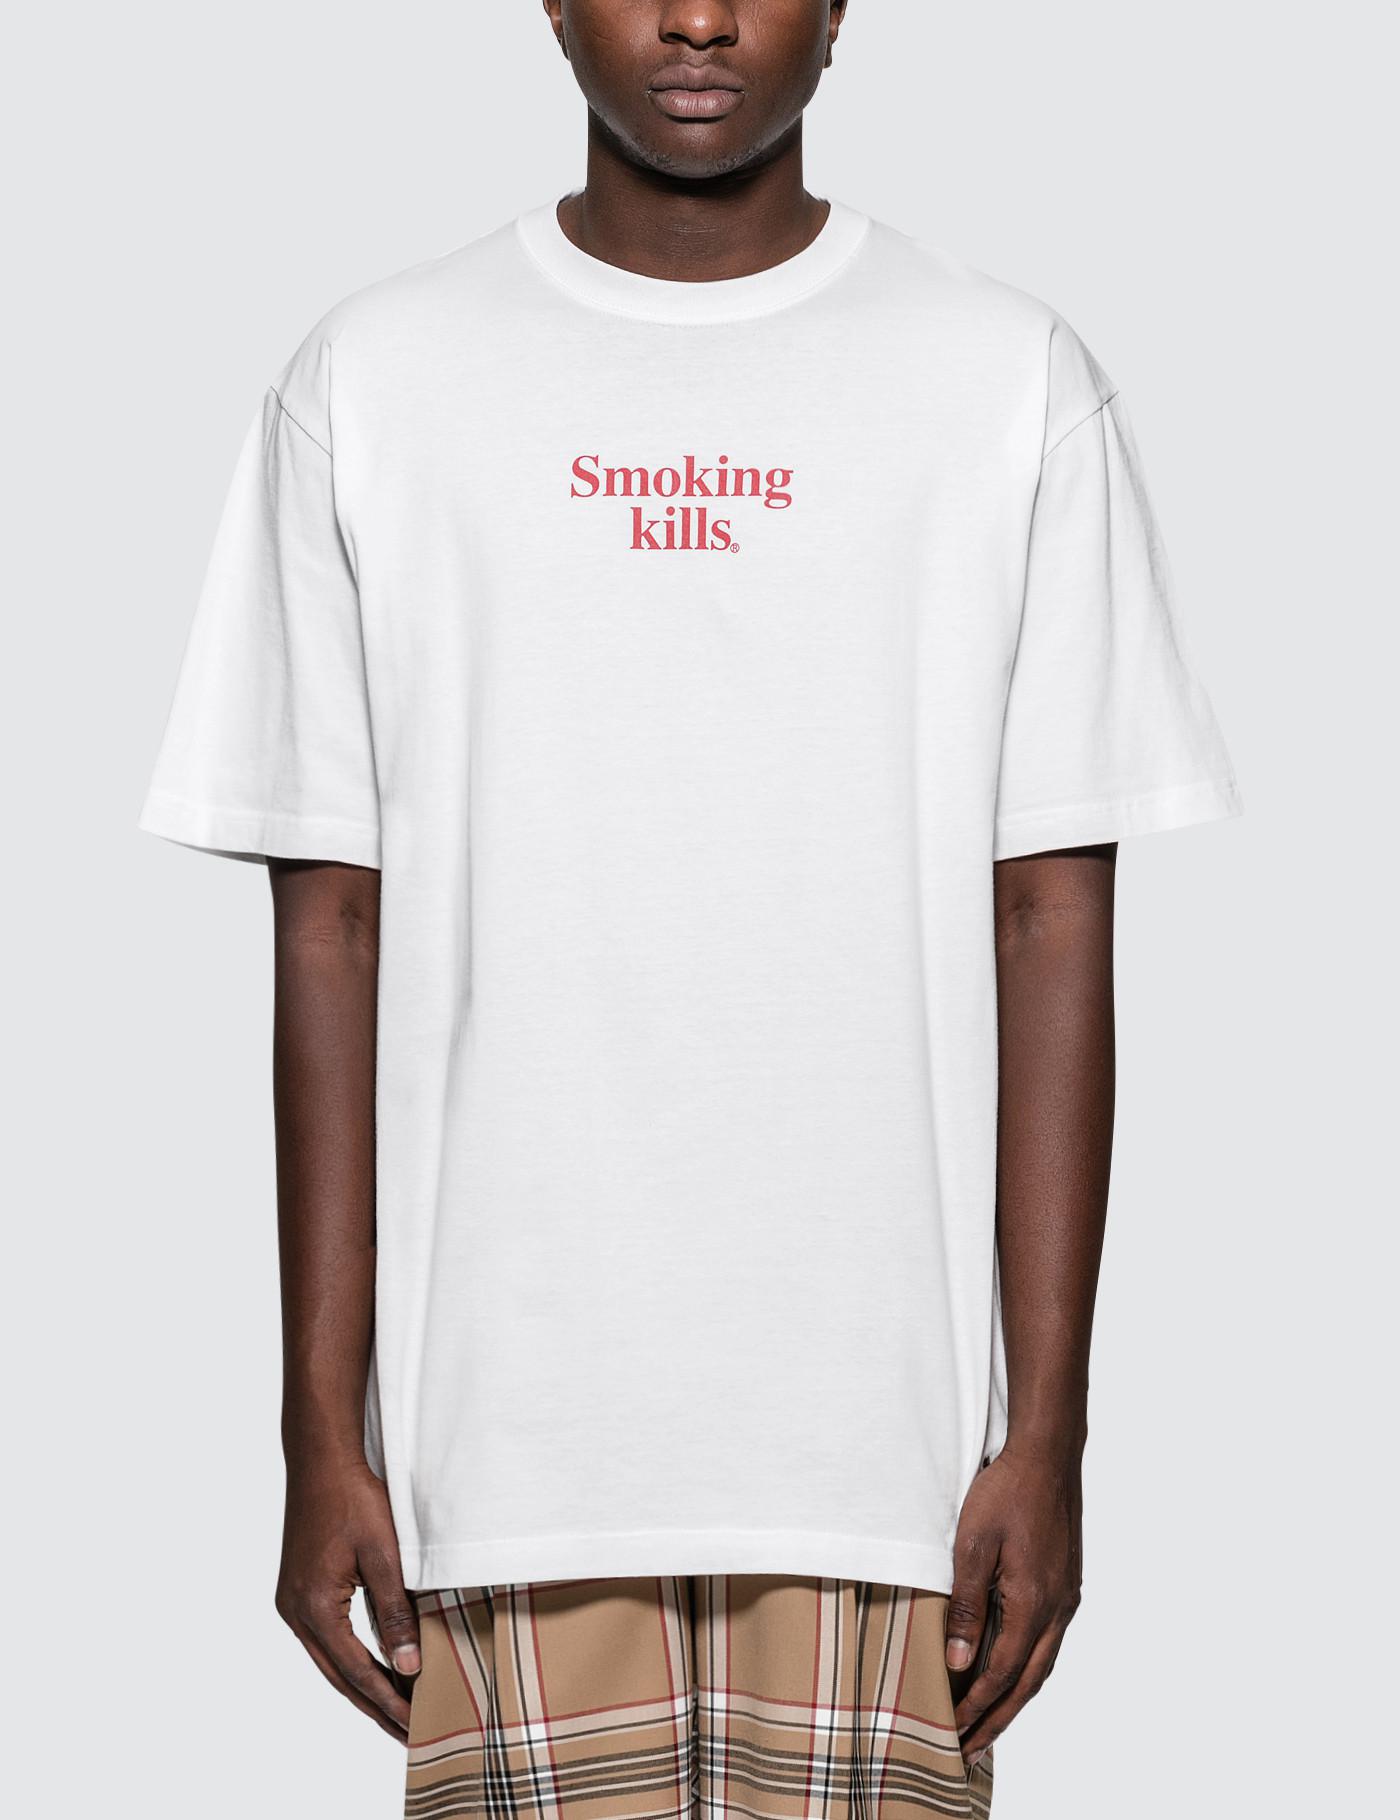 Fr2 One Piece X Smoking Kills S S T Shirt In White For Men Lyst